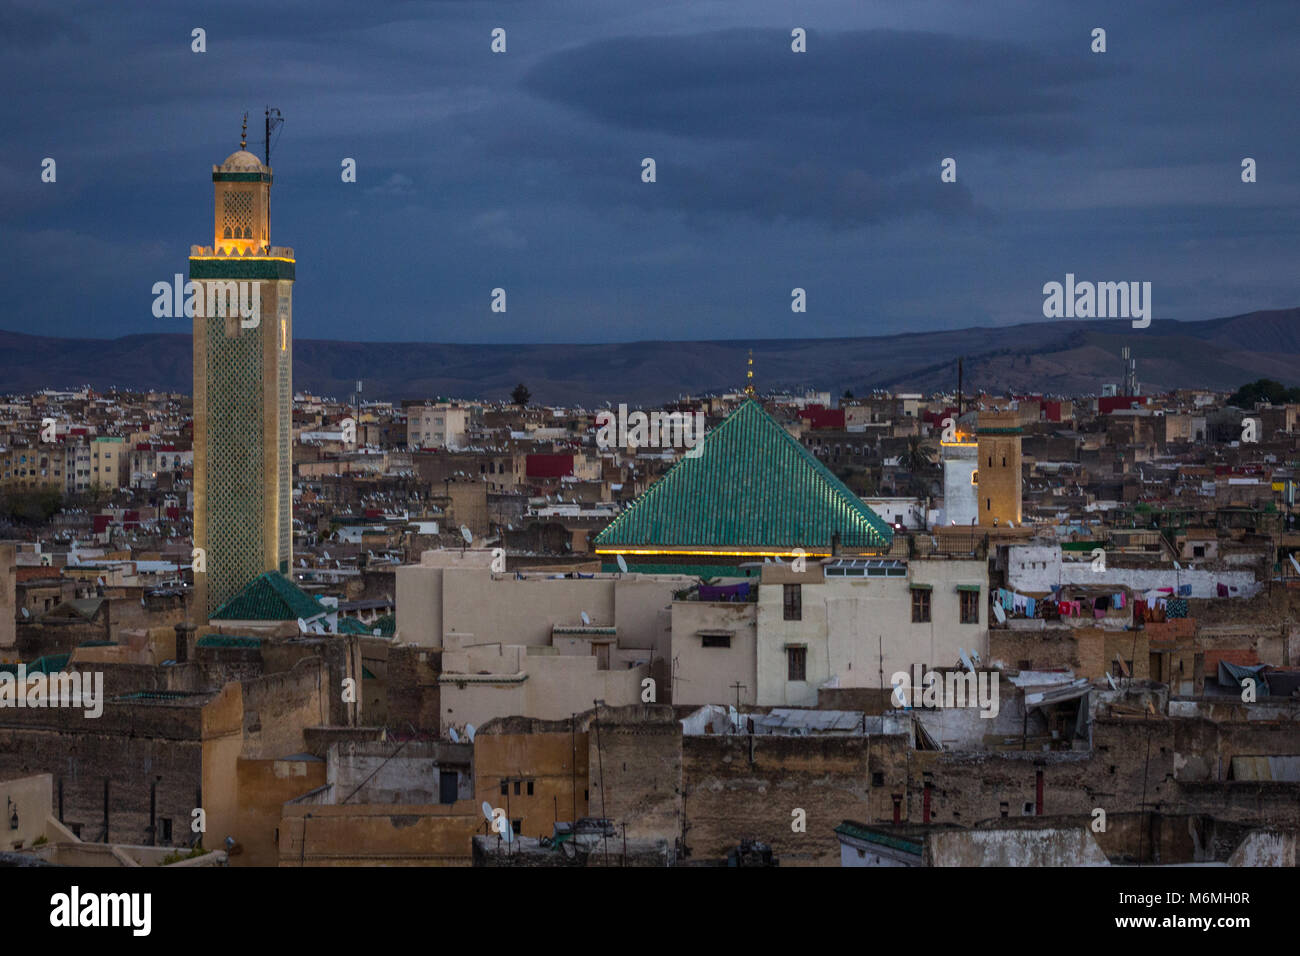 The lit minaret and rooftop of Karaouiyine Mosque at dusk, against the rooftops of Fes and the mountains in the background Stock Photo